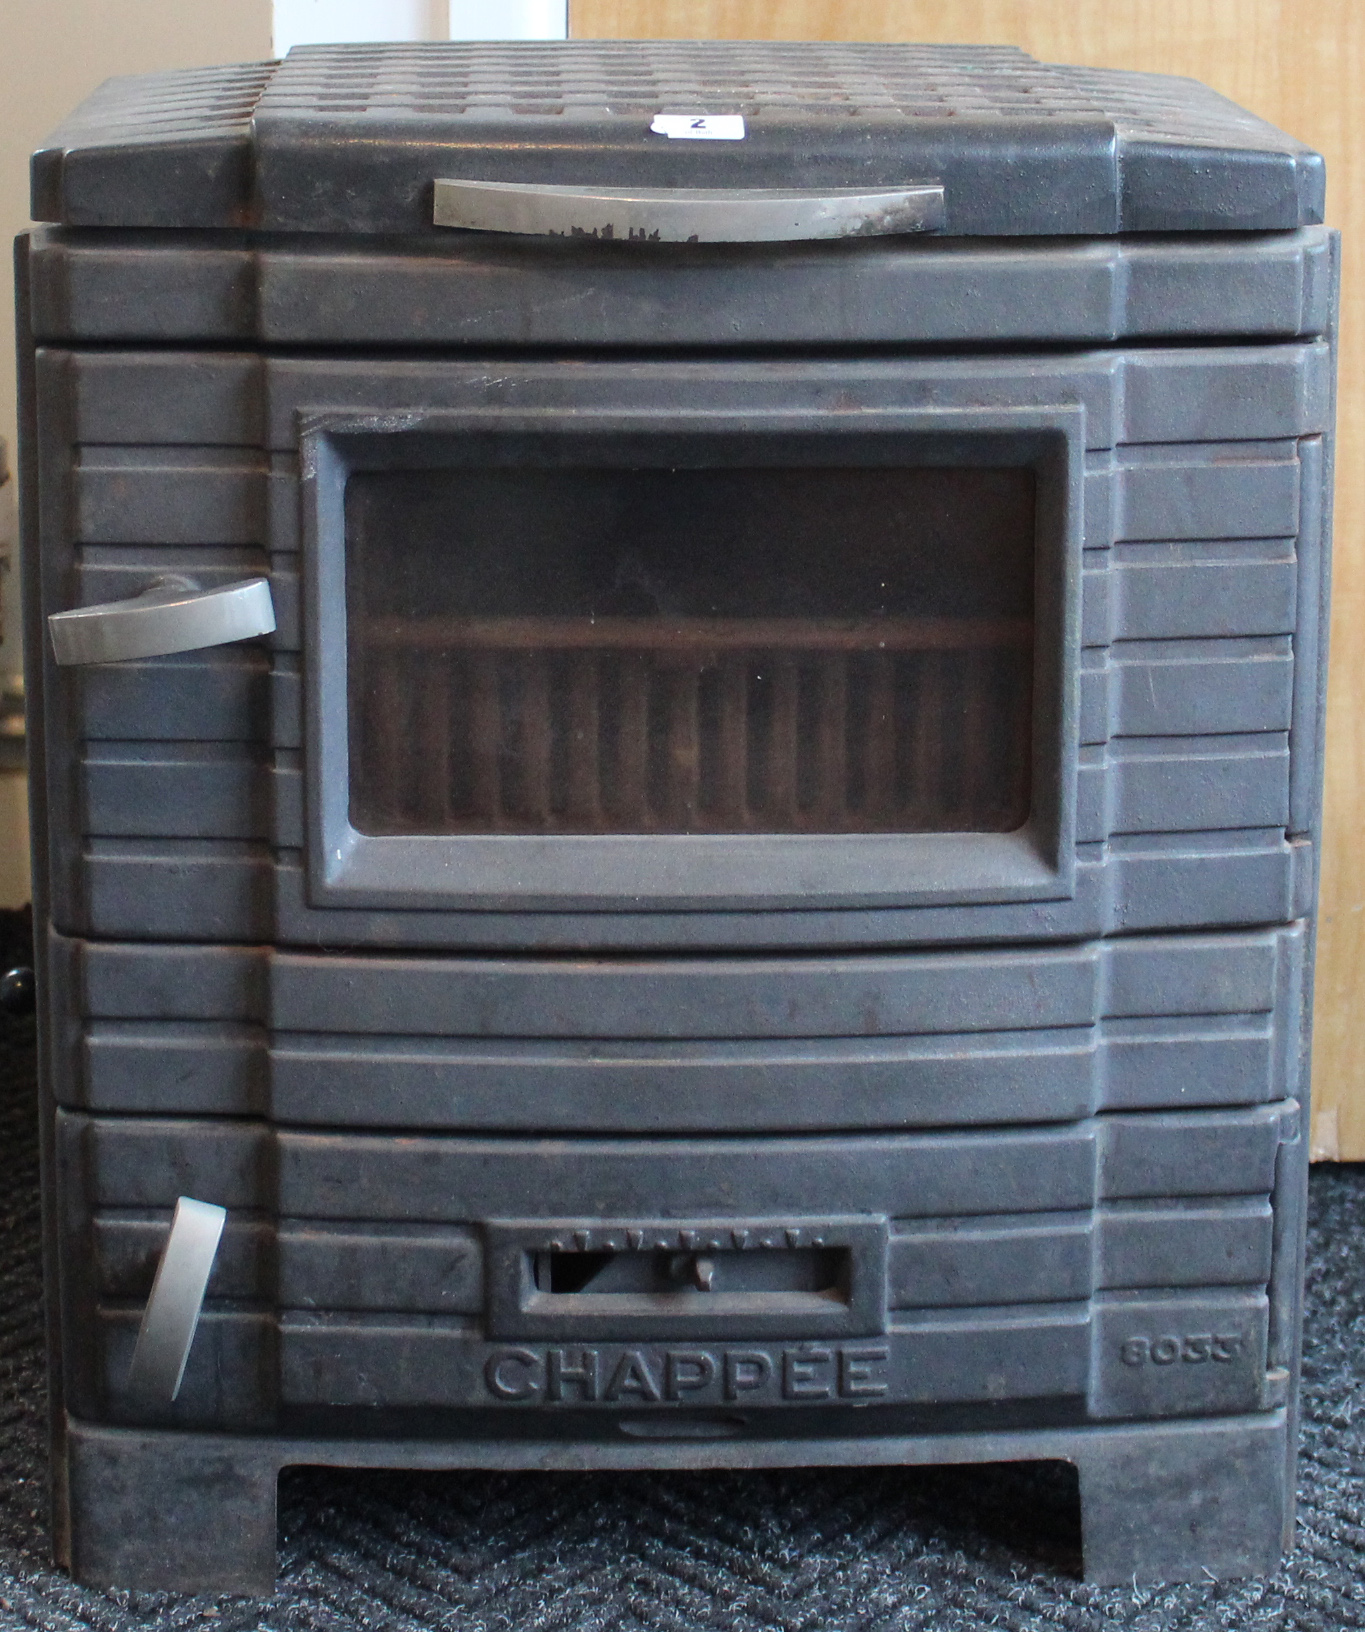 A Chappee wood-burning stove (No. 8033), in cast iron case, 19” wide x 22” high.